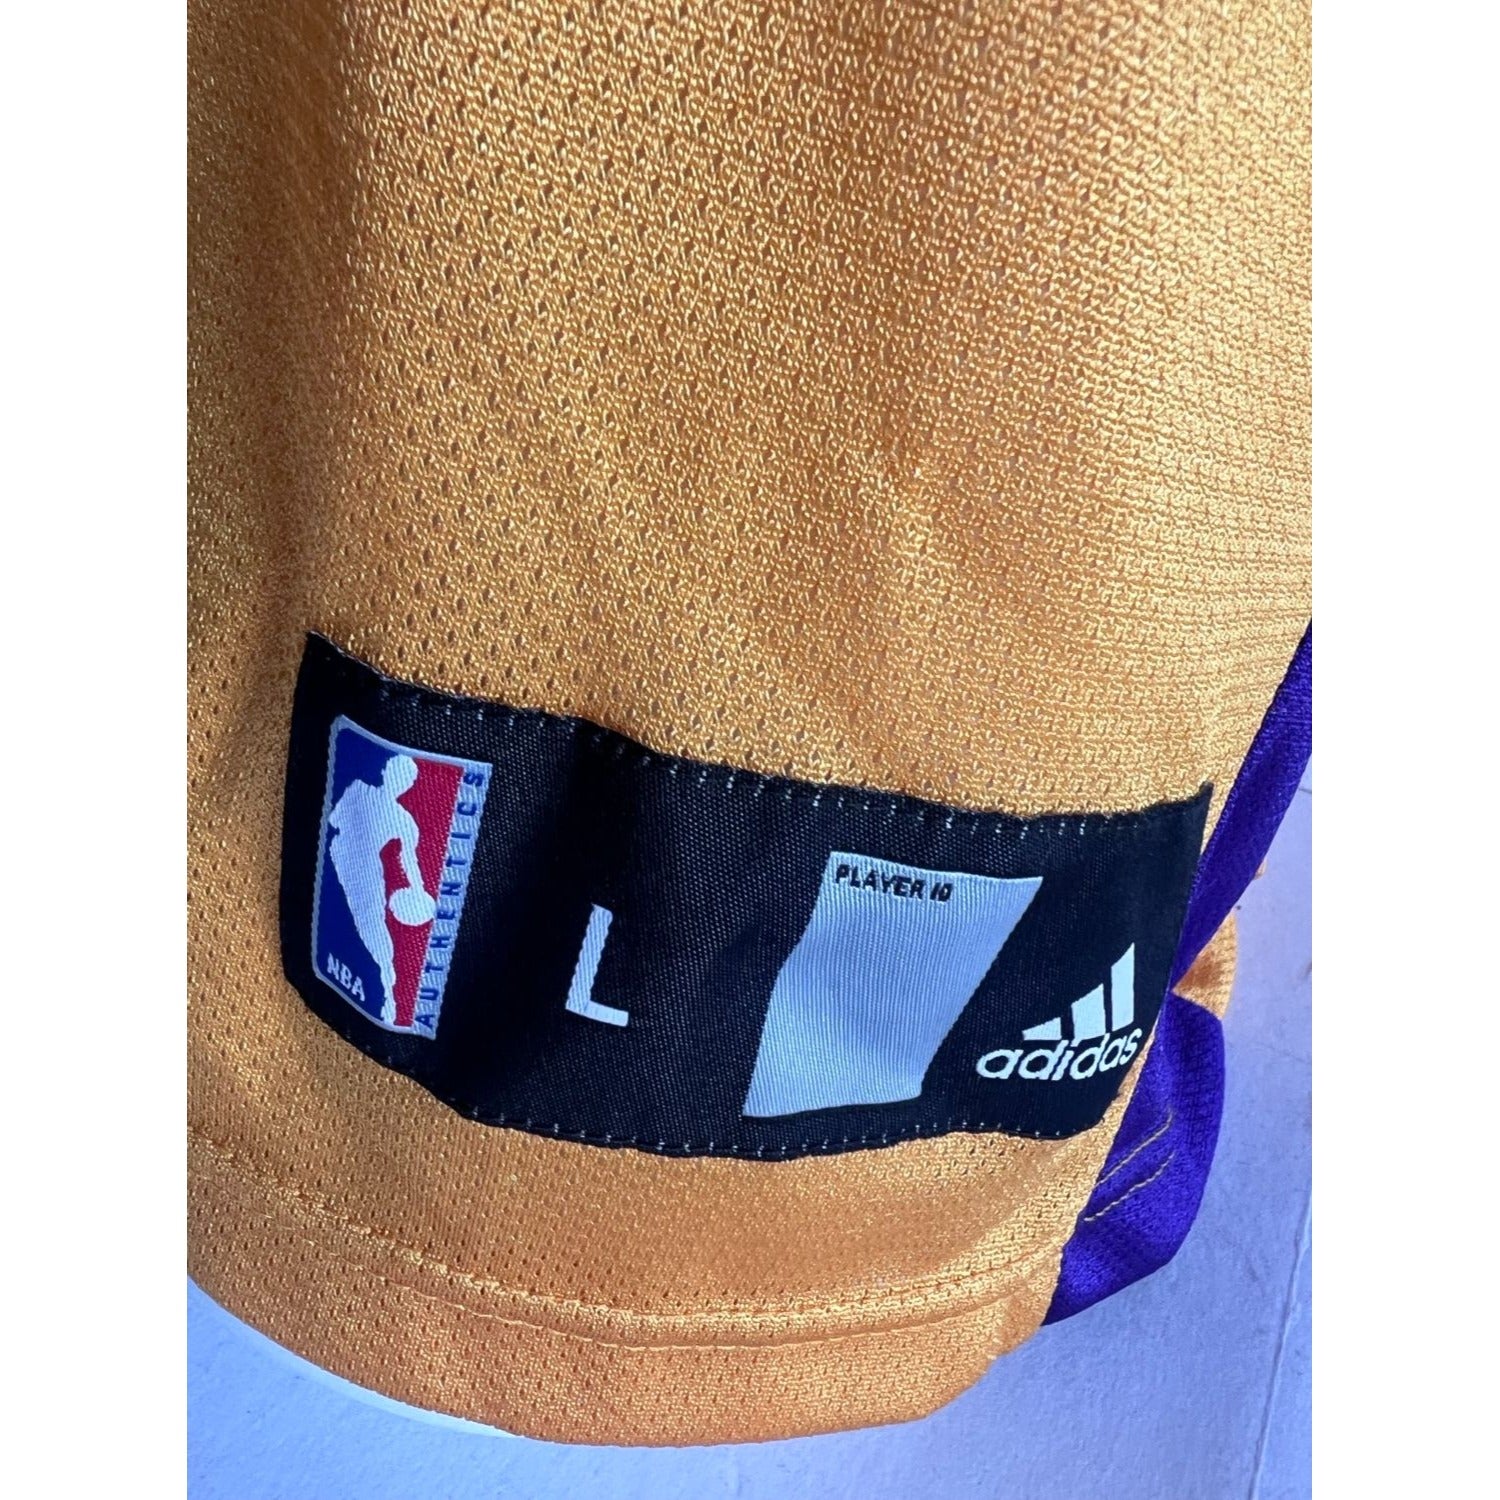 Los Angeles Lakers jersey Kobe Bryant "Black Mamba " inscribed & signed with proof